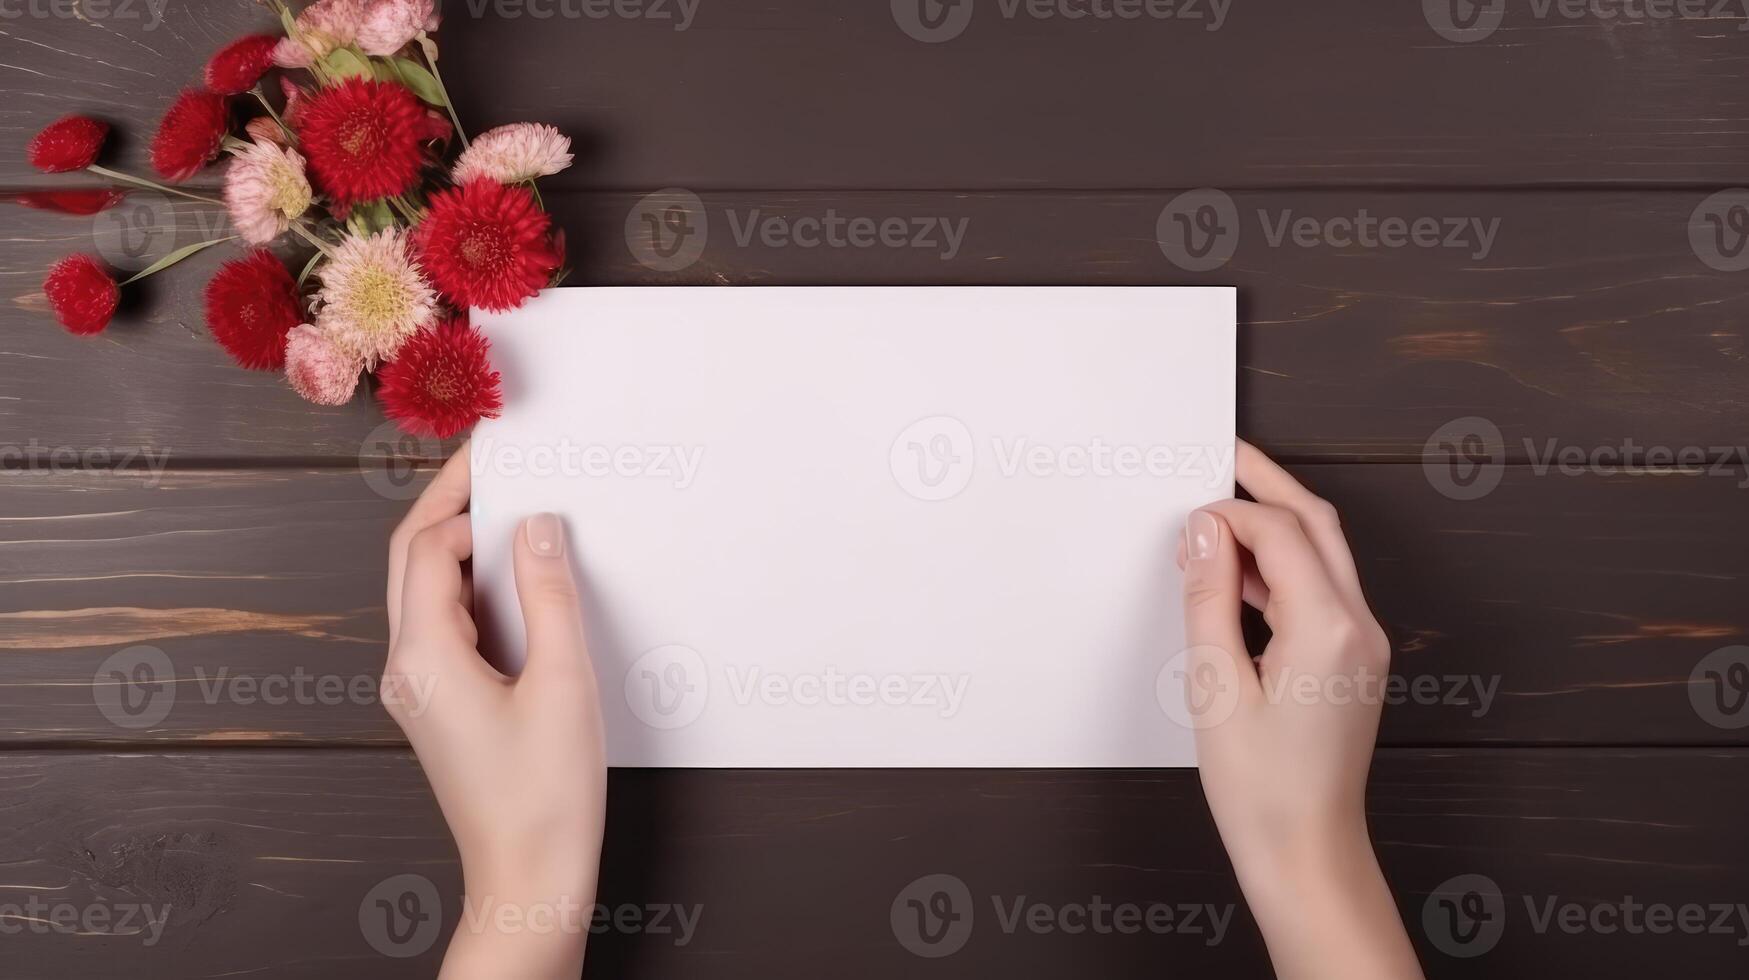 Top VIew Photo of Female Holding Blank White Paper Mockup and Beautiful Flowers on Wooden Table. .